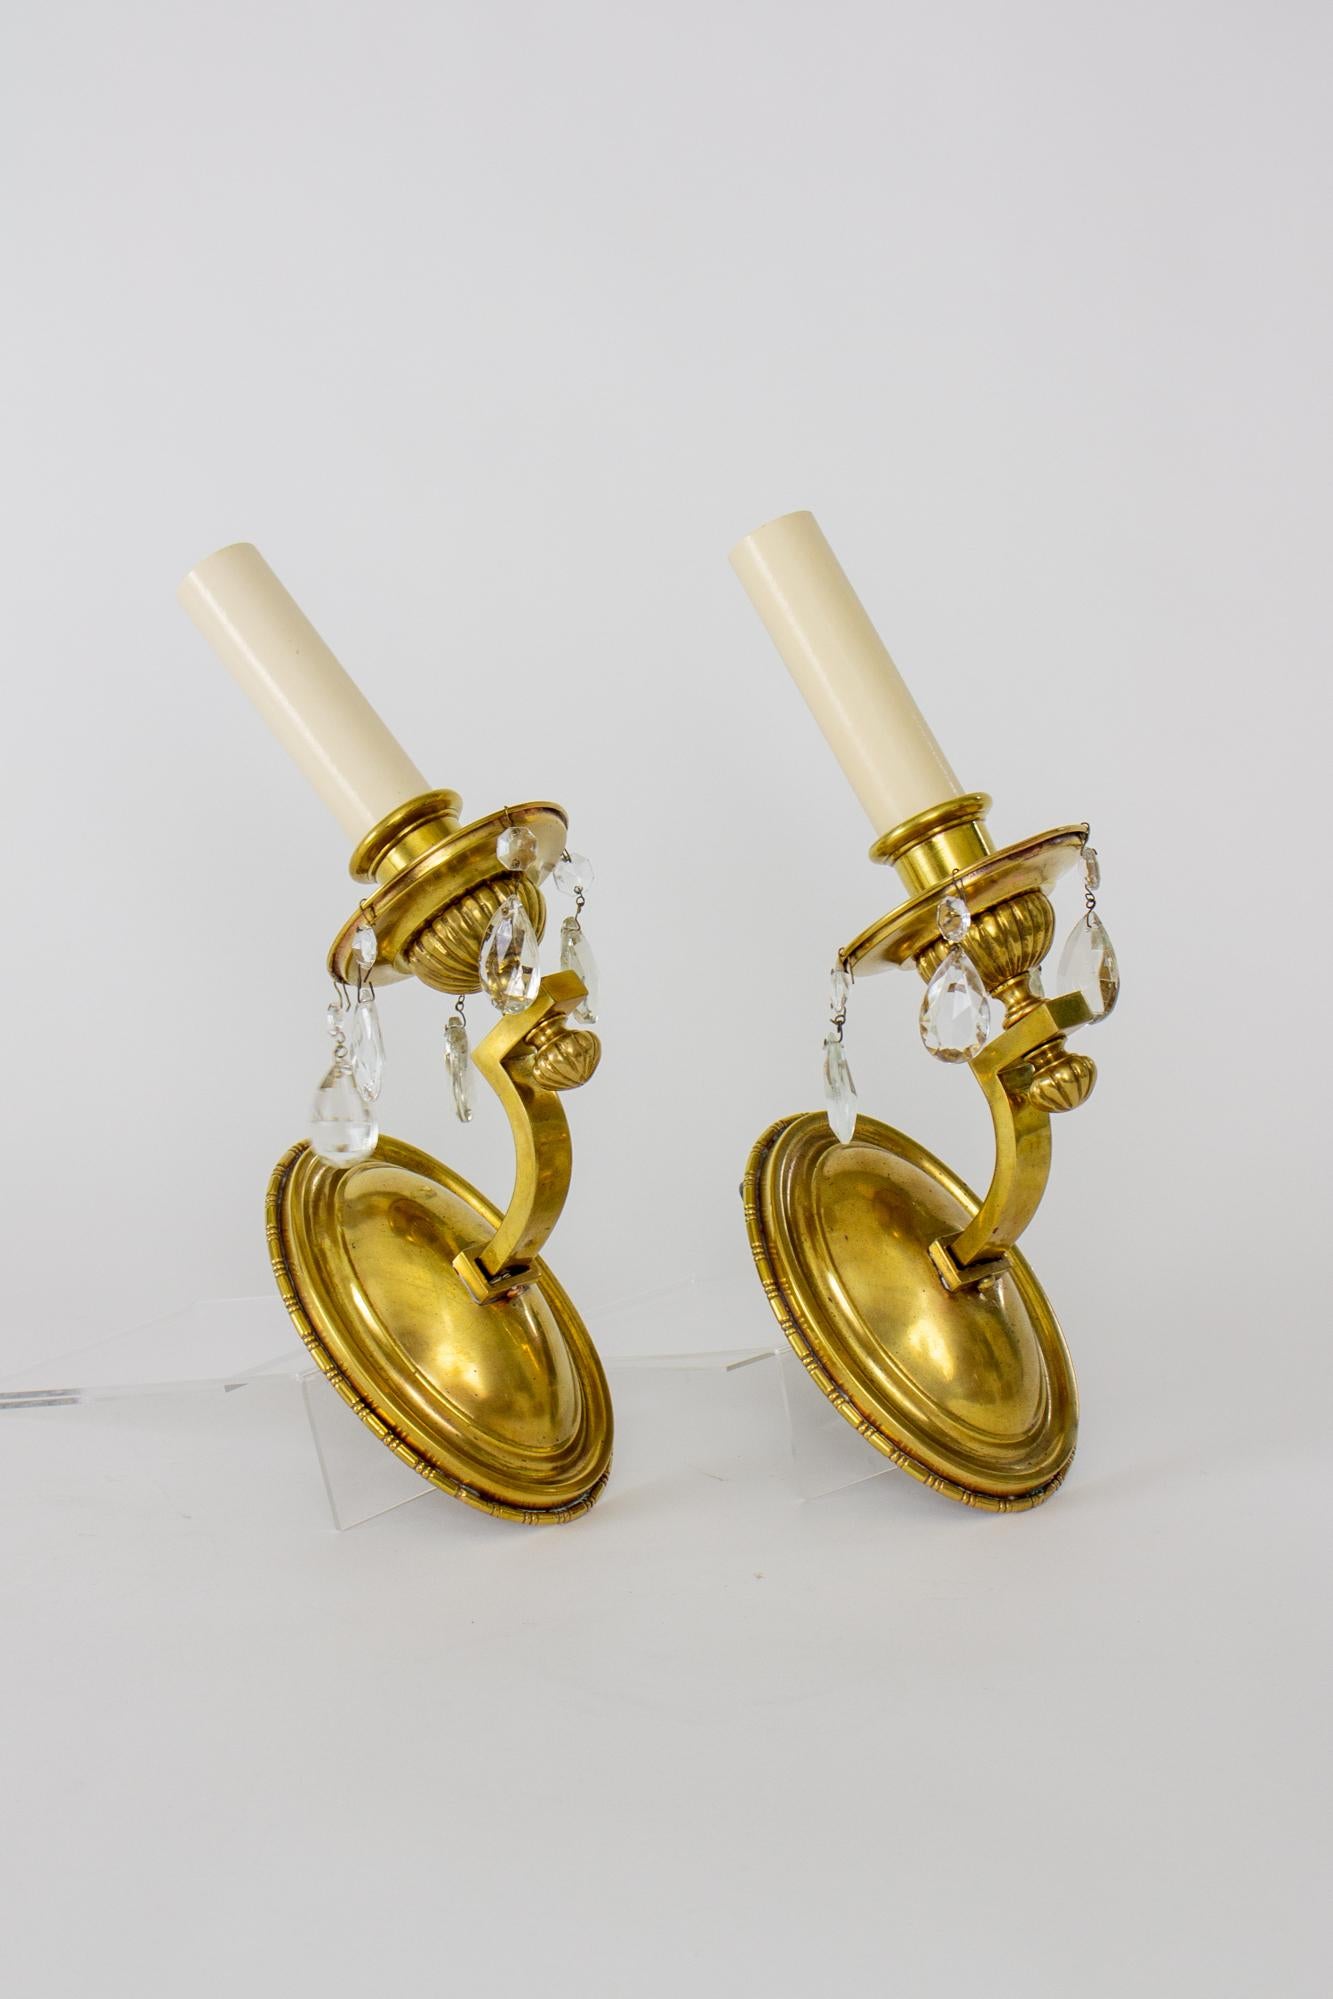 American Empire Early 20th Century Brass Sconces with Crystals - a Pair For Sale